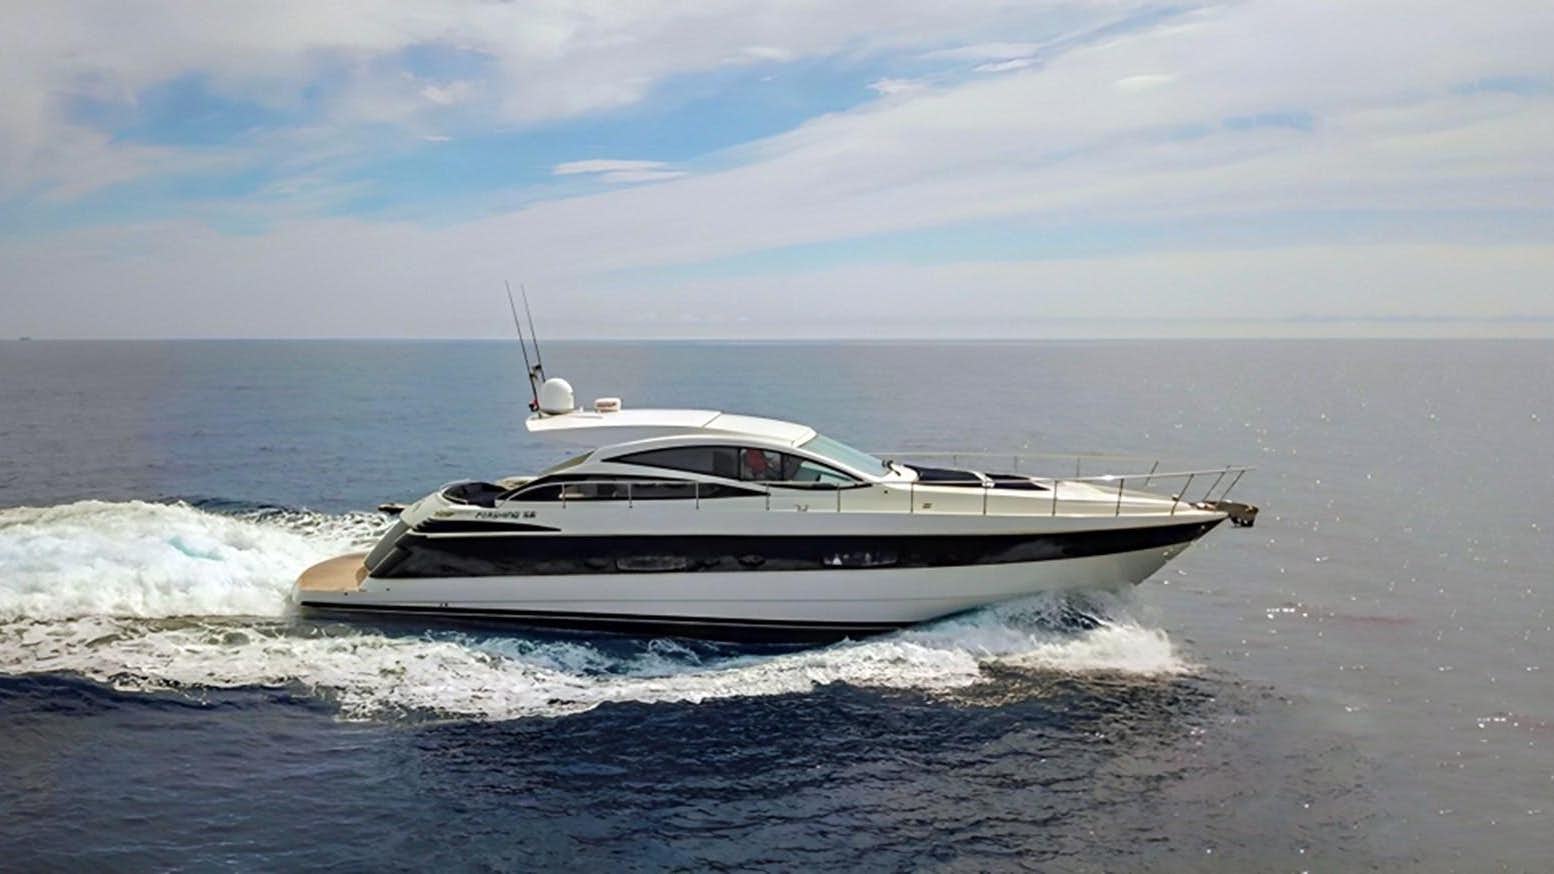 Pershing 56
Yacht for Sale